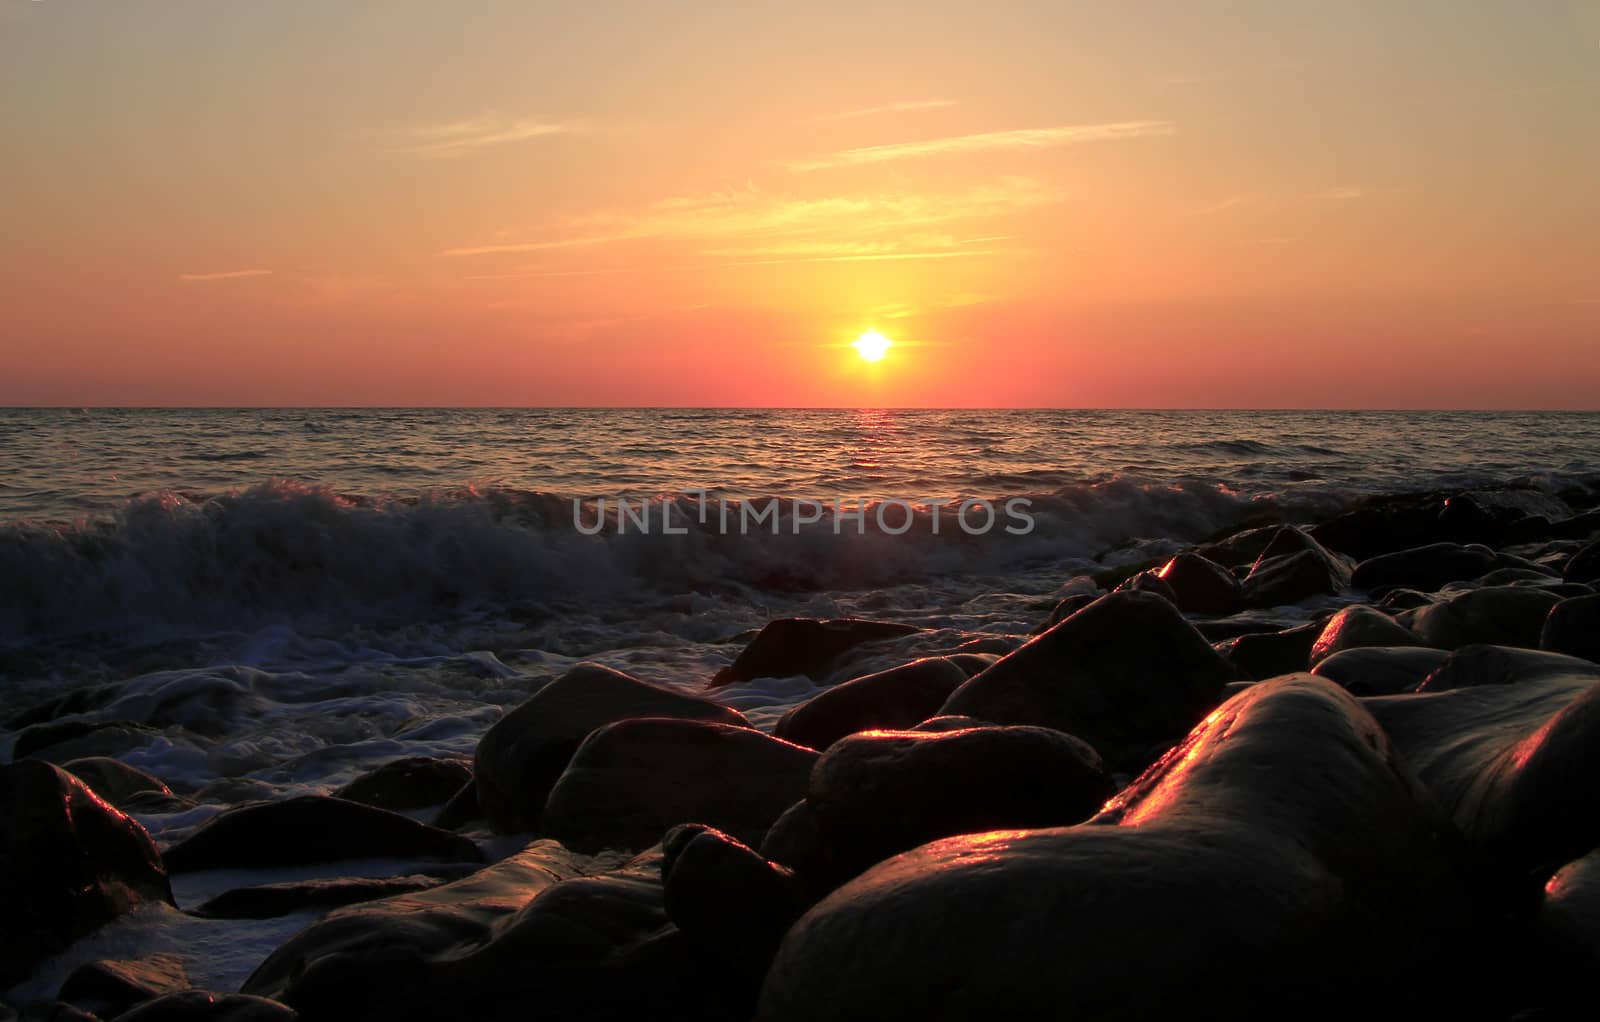 Sunset over the Black sea and summertime beach by scullery